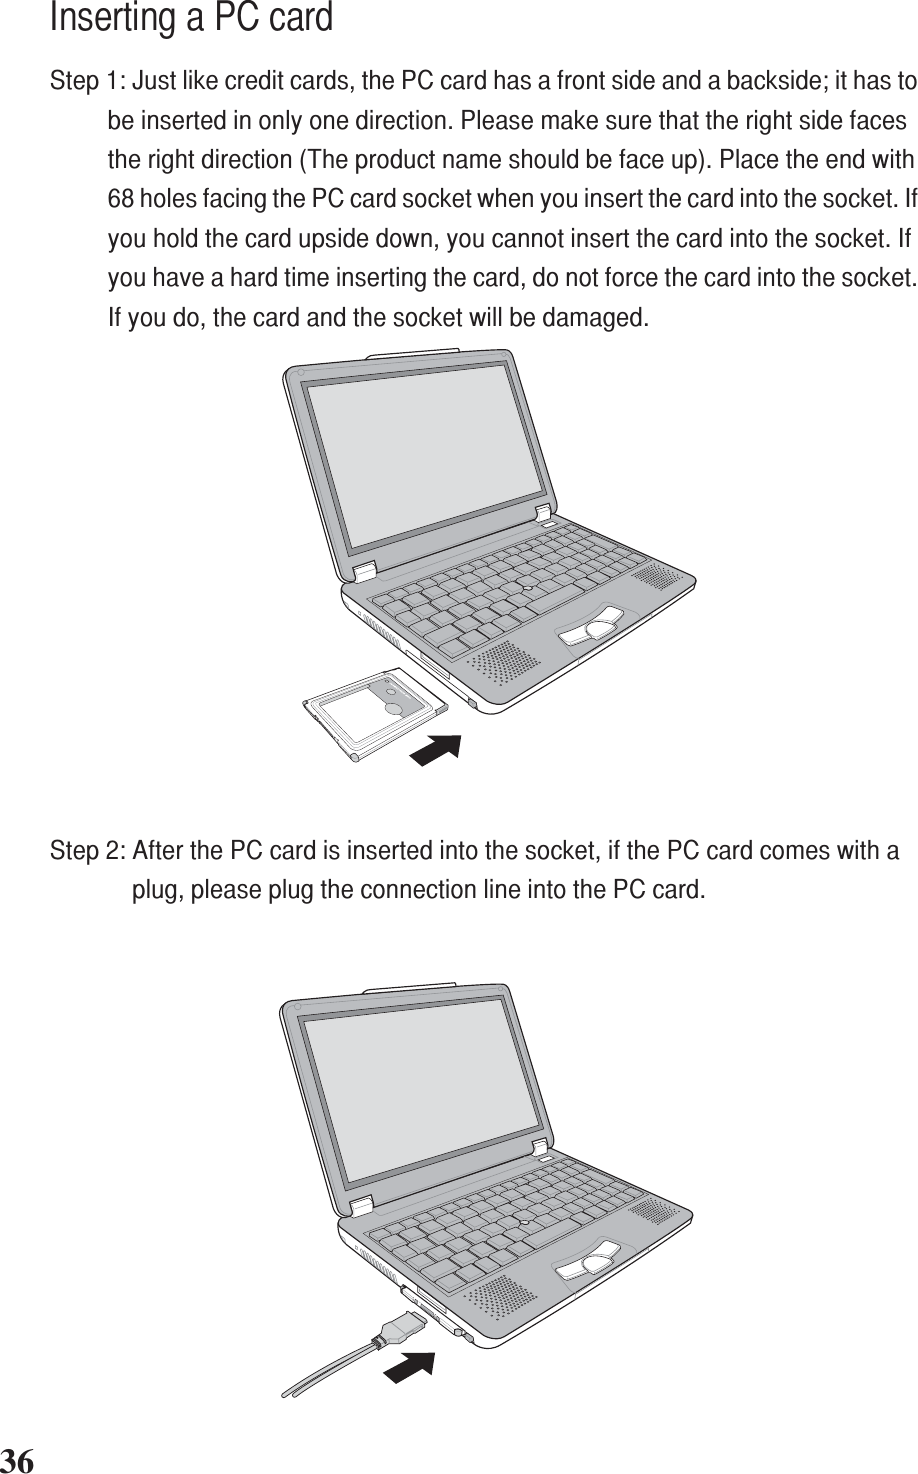 36+-+-Inserting a PC cardStep 1: Just like credit cards, the PC card has a front side and a backside; it has tobe inserted in only one direction. Please make sure that the right side facesthe right direction (The product name should be face up). Place the end with68 holes facing the PC card socket when you insert the card into the socket. Ifyou hold the card upside down, you cannot insert the card into the socket. Ifyou have a hard time inserting the card, do not force the card into the socket.If you do, the card and the socket will be damaged.Step 2: After the PC card is inserted into the socket, if the PC card comes with aplug, please plug the connection line into the PC card.